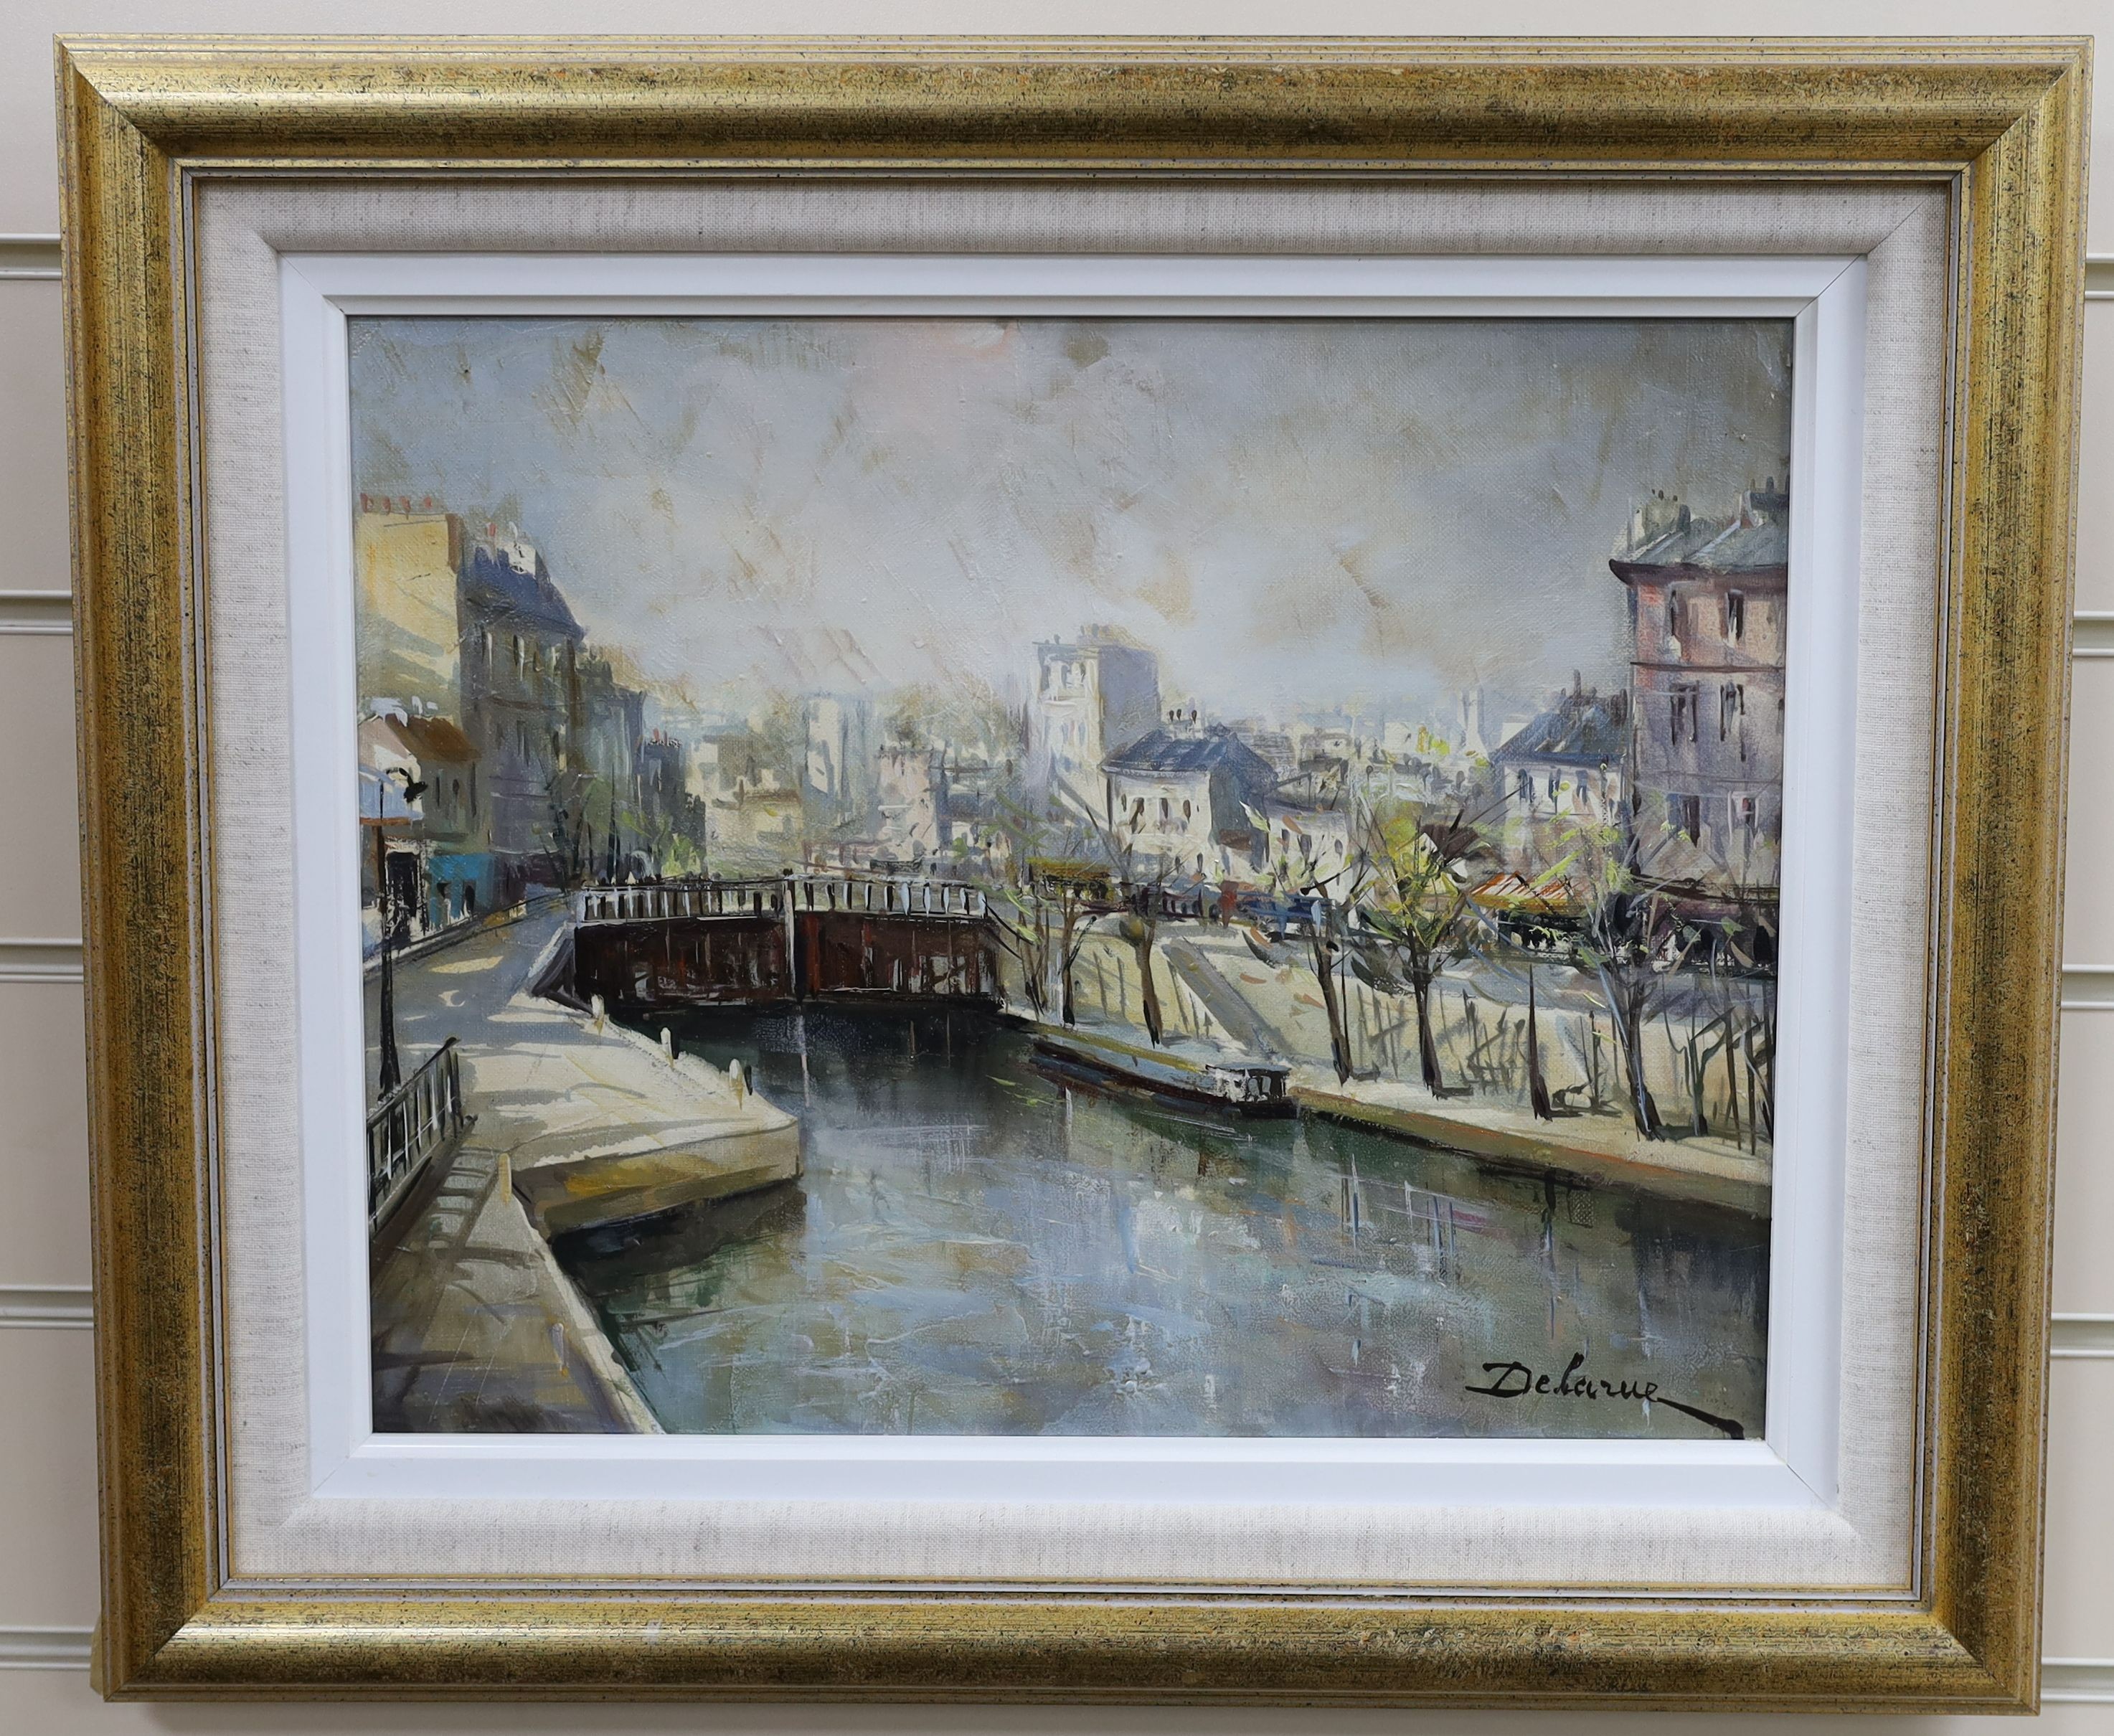 Lucien Delarue (French, 1925-2011), oil on canvas, 'Lock Gates', signed, 31 x 39cm, with Stacy Marks certificate